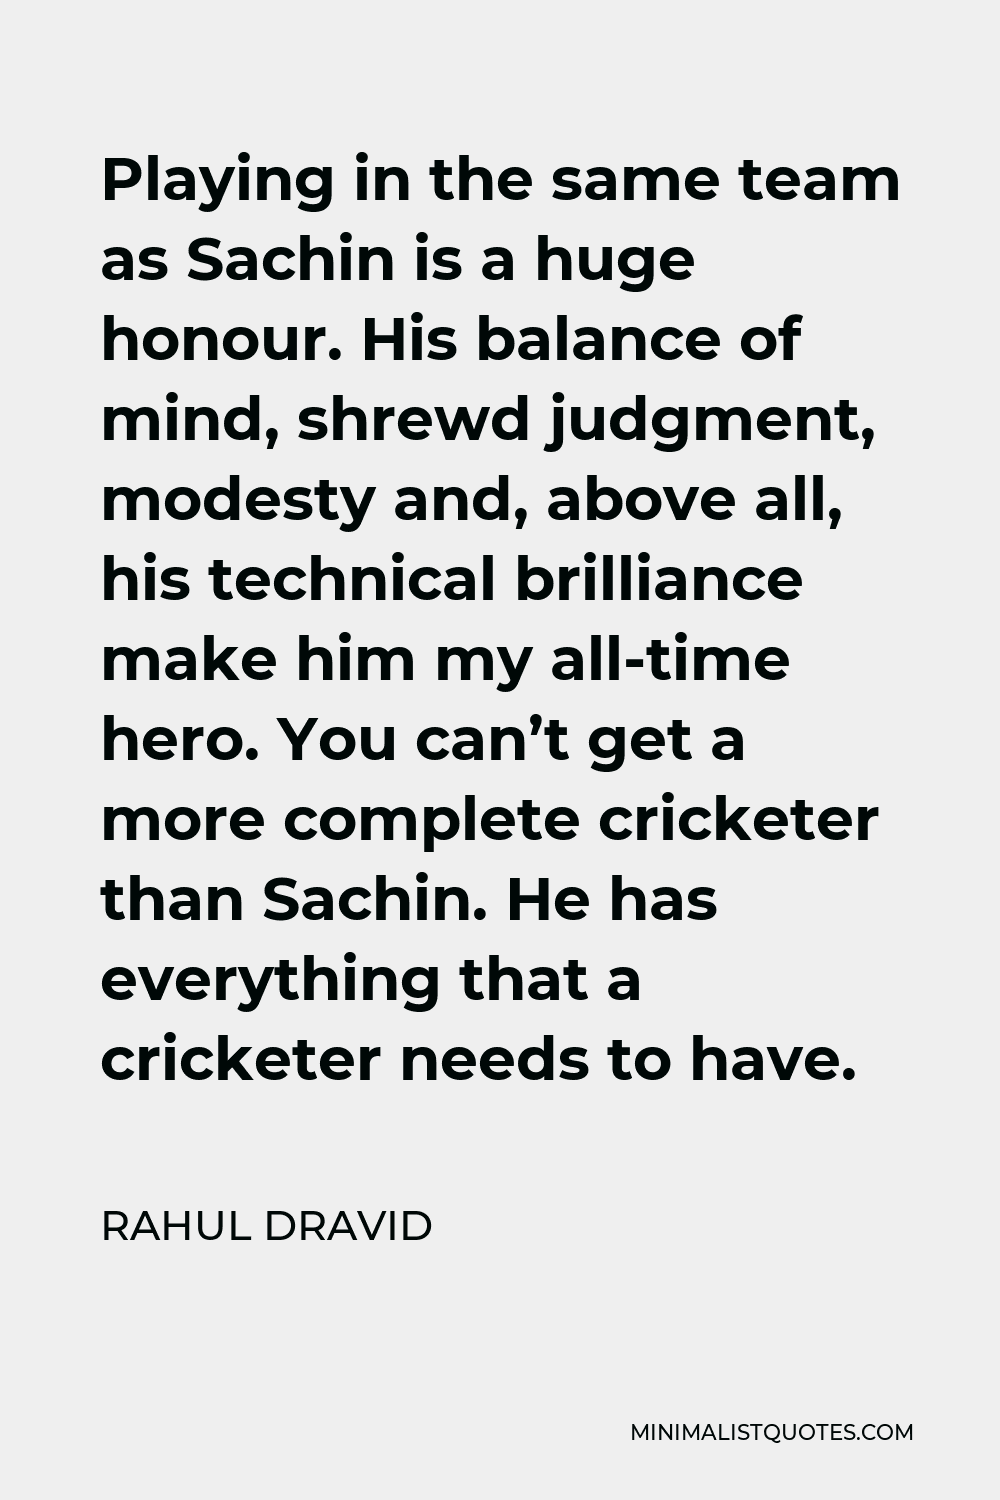 Rahul Dravid Quote - Playing in the same team as Sachin is a huge honour. His balance of mind, shrewd judgment, modesty and, above all, his technical brilliance make him my all-time hero. You can’t get a more complete cricketer than Sachin. He has everything that a cricketer needs to have.